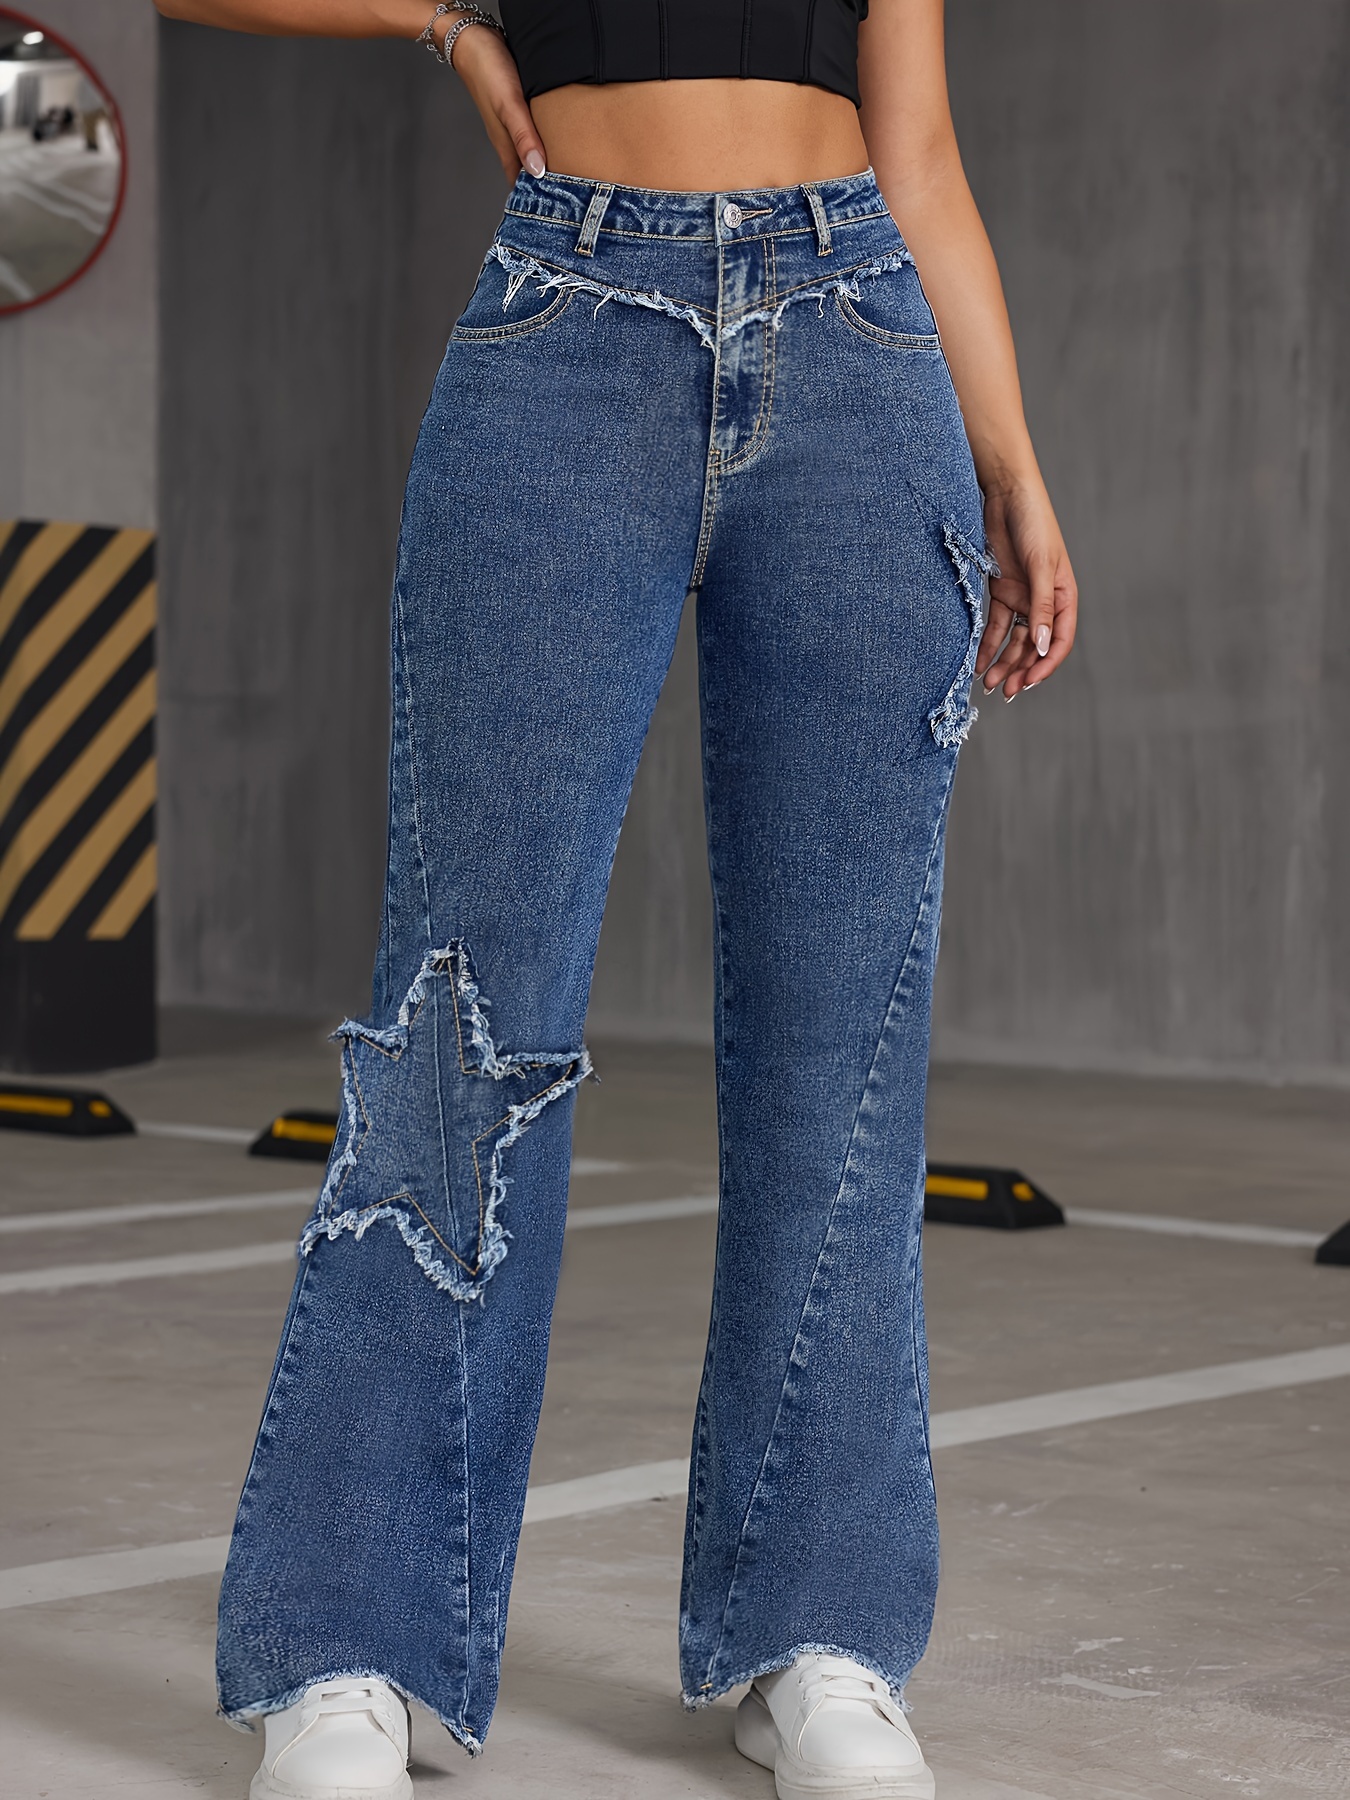 Blue Floral Embroidered Flare Jeans, High Waist Slant Pockets High Stretch  Bell Bottom Jeans, Women's Denim Jeans & Clothing